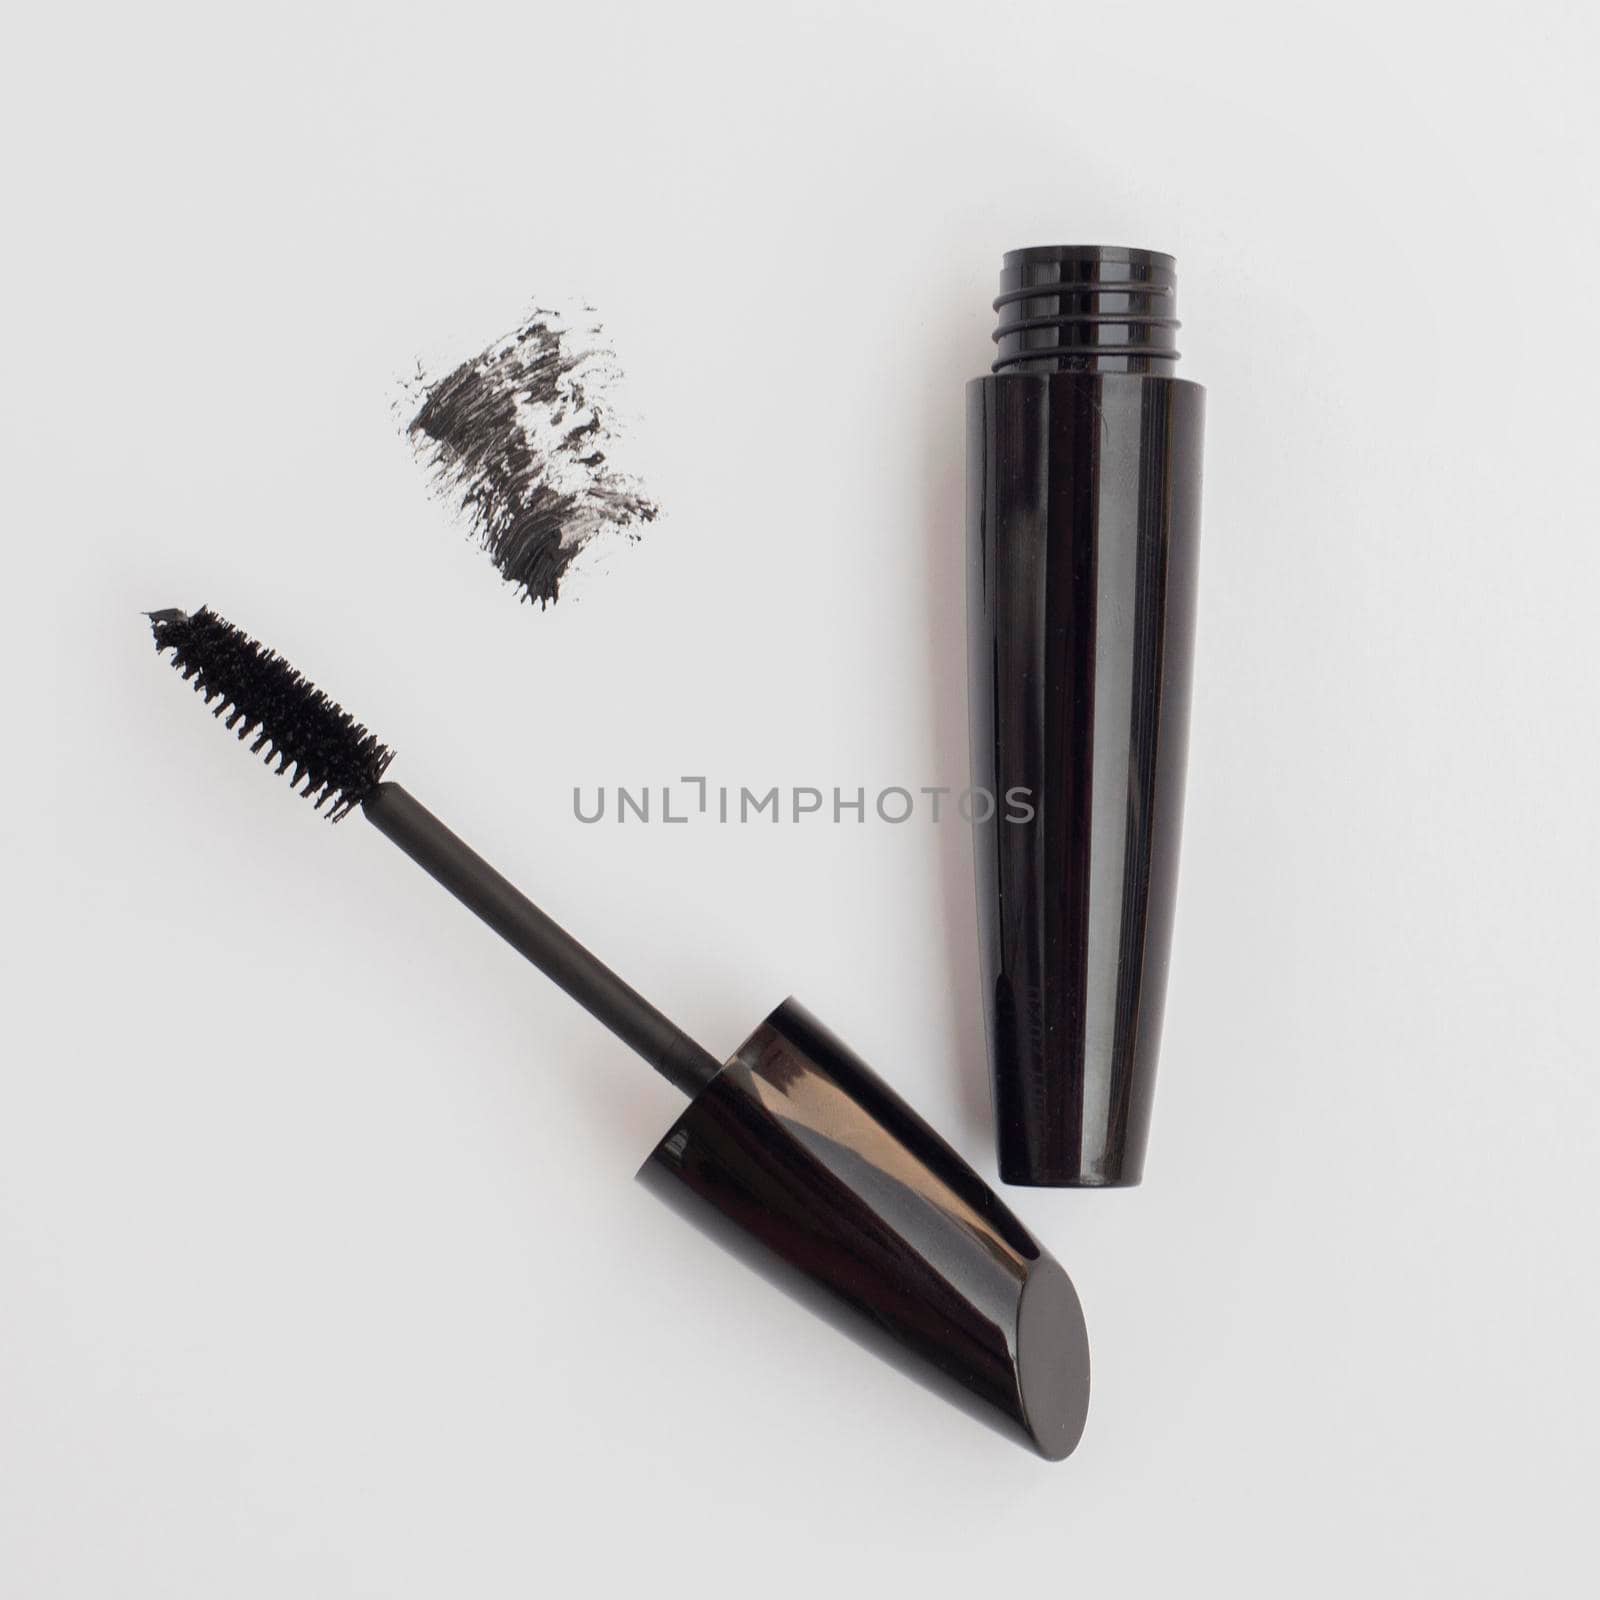 top view black mascara with grey background. High quality photo by Zahard